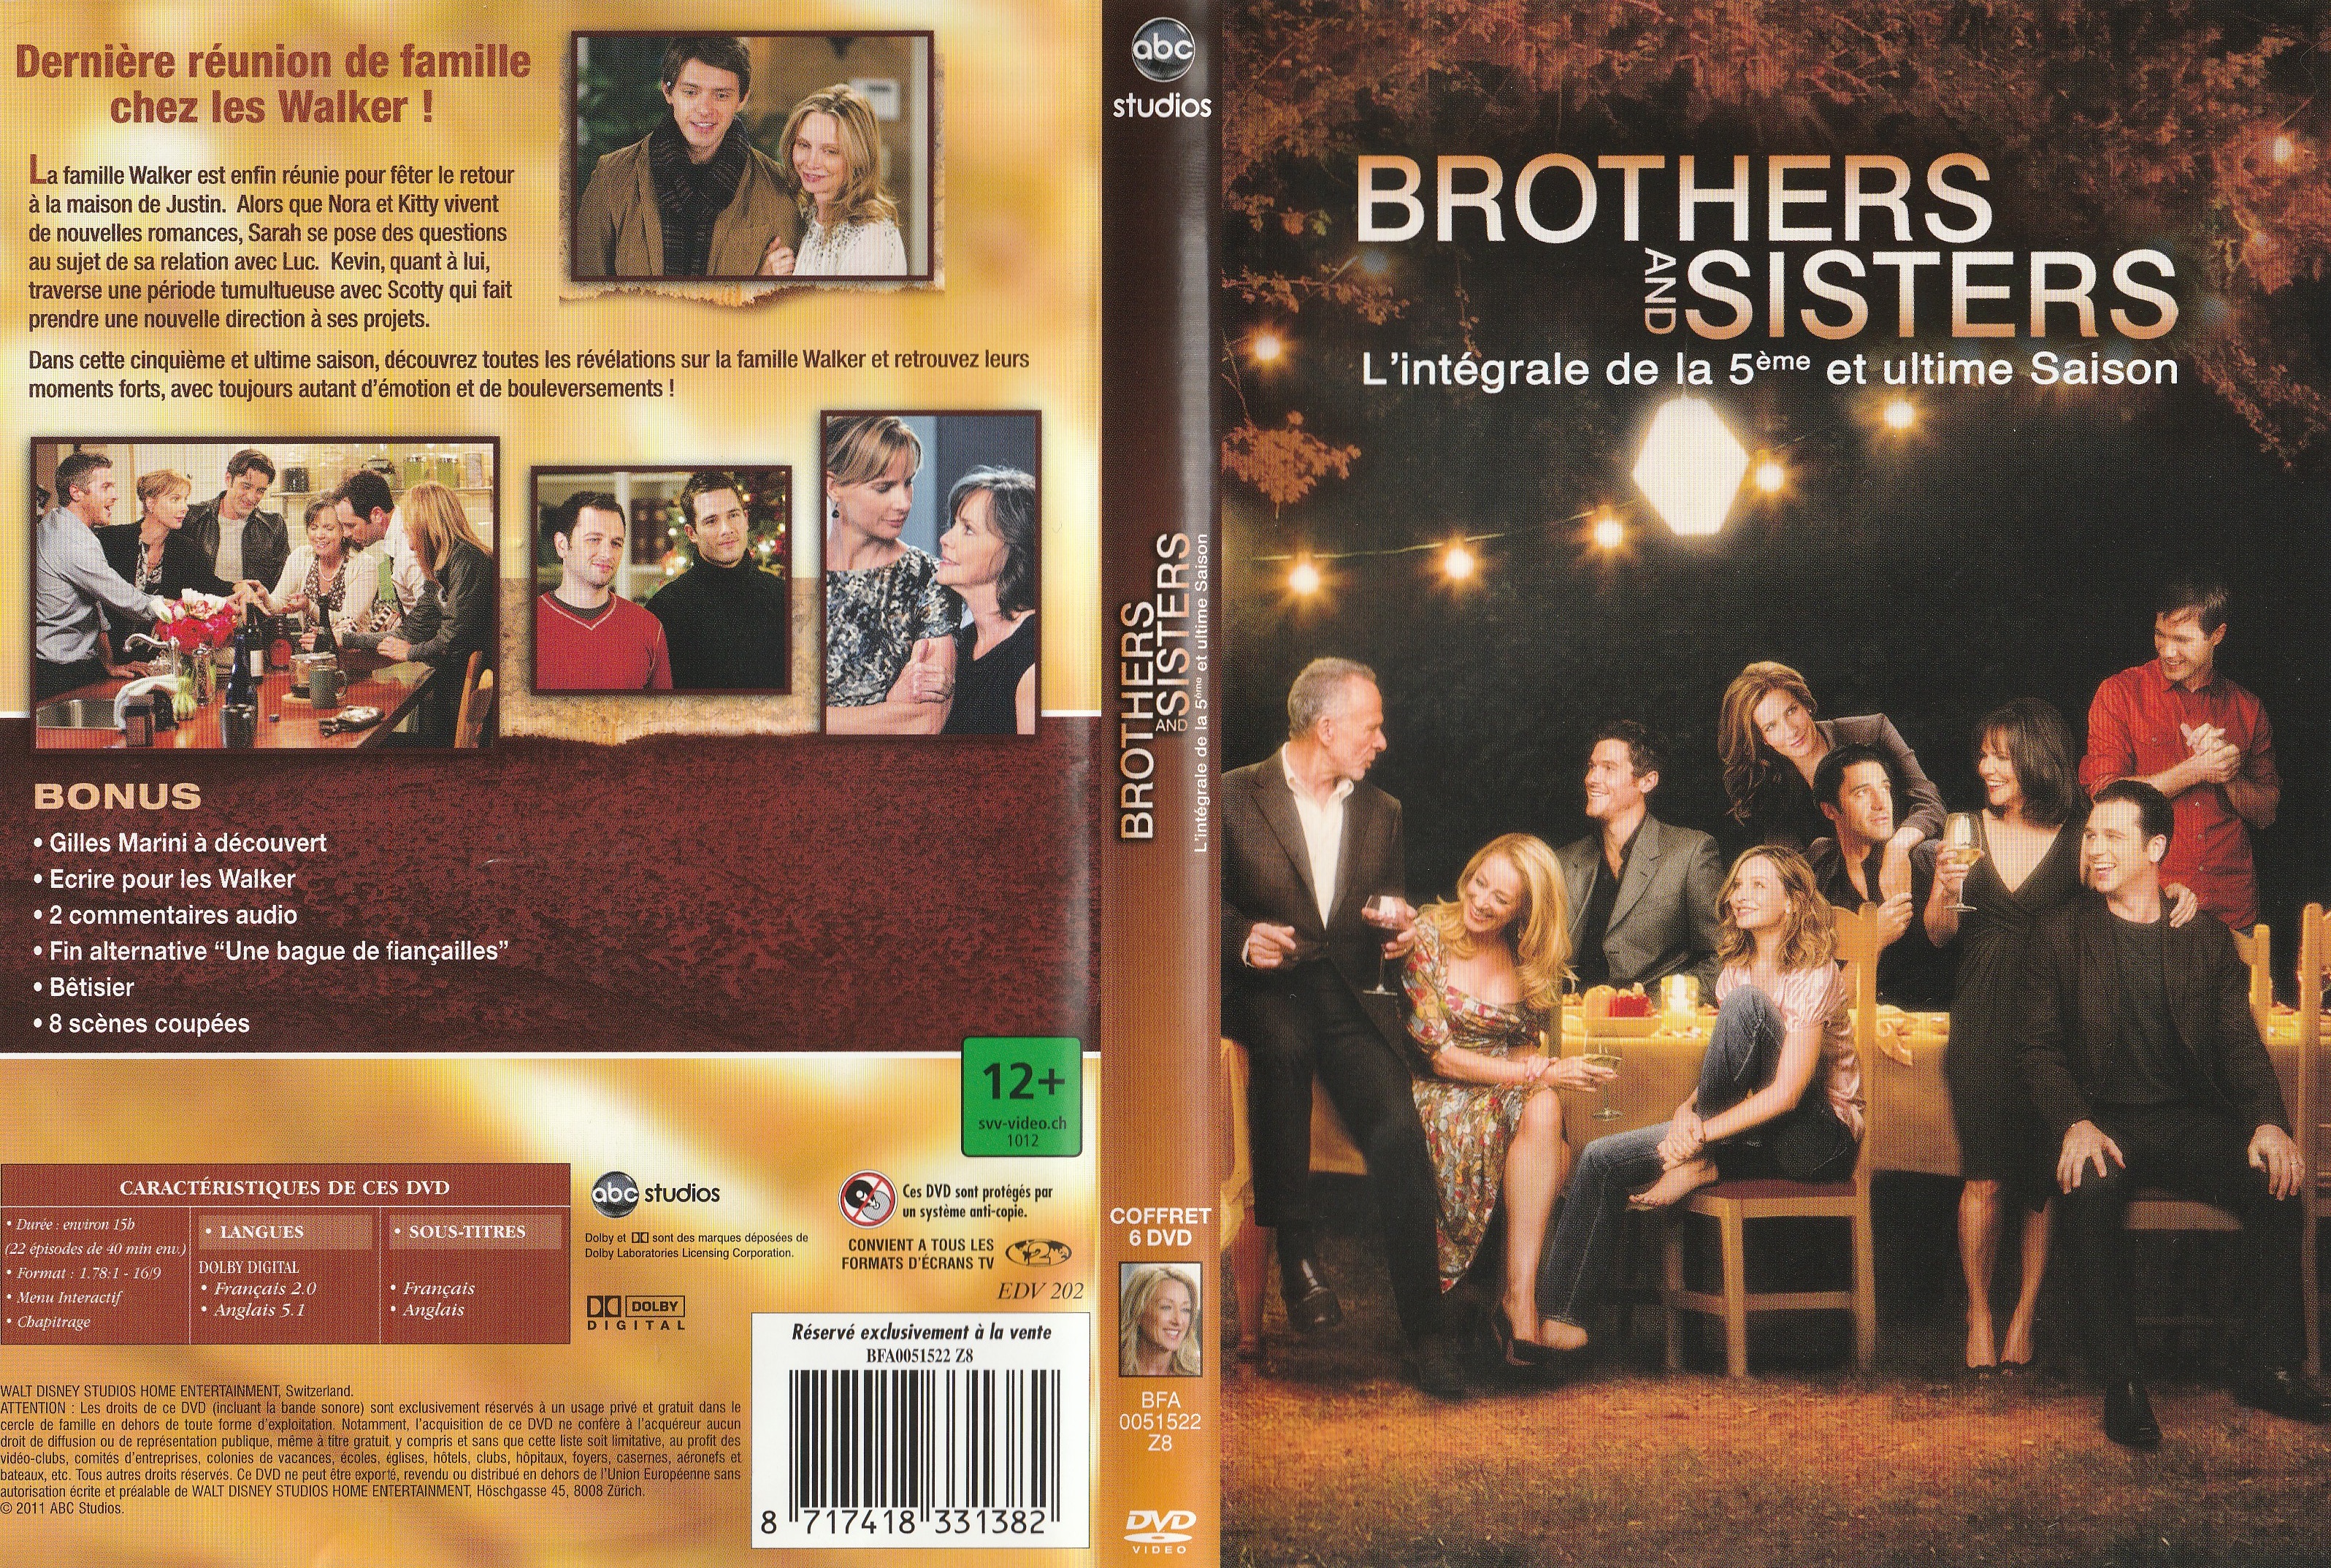 Jaquette DVD Brothers and Sisters Saison 5